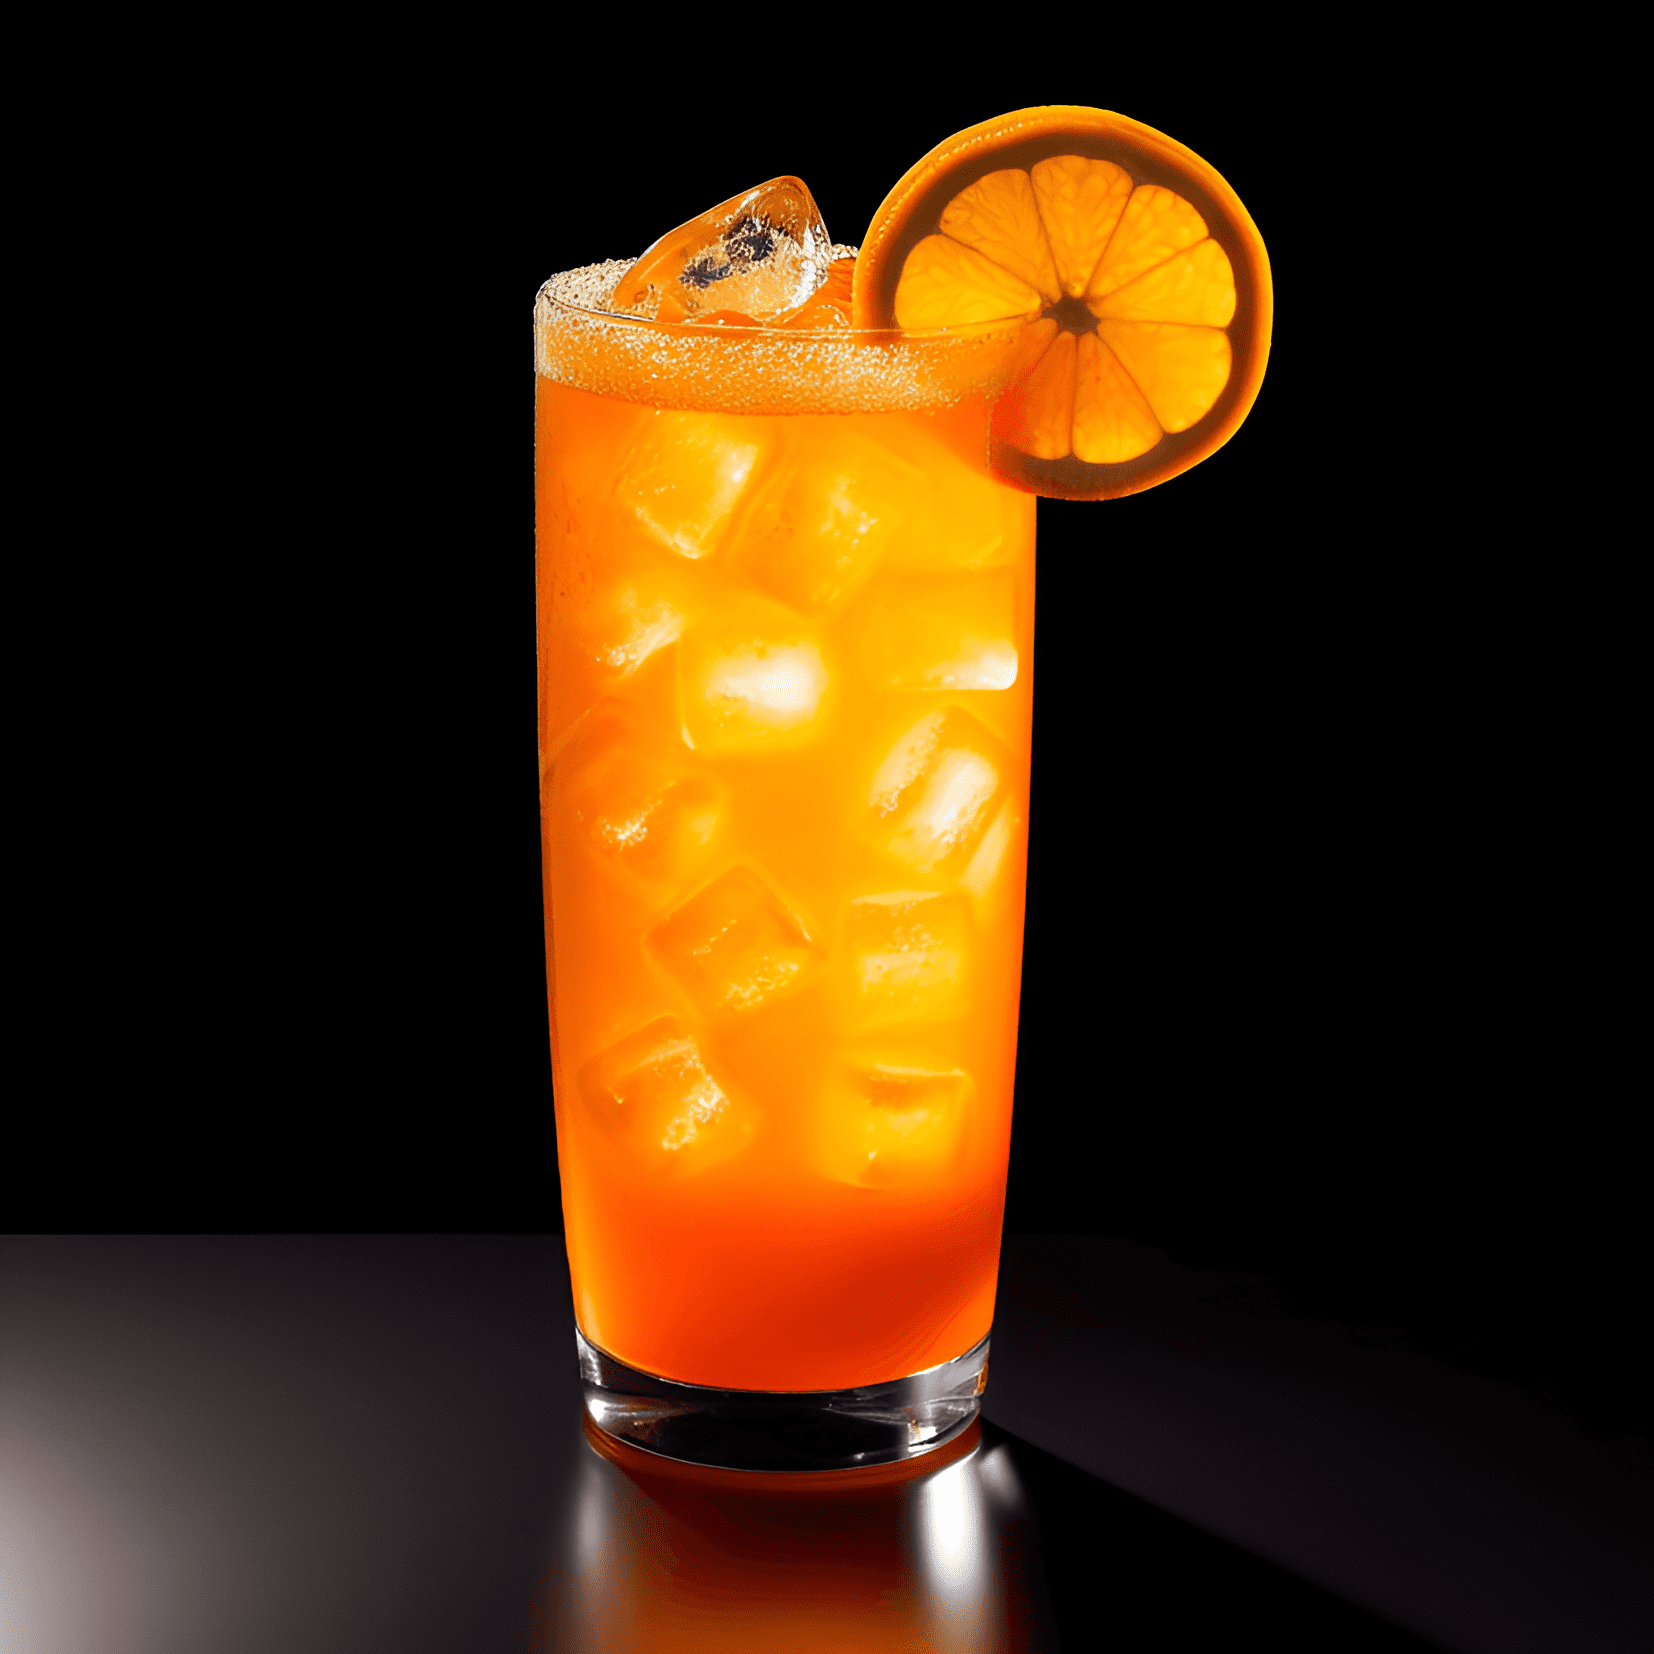 Orange Crush Cocktail Recipe - The Orange Crush cocktail is a delightful mix of sweet, tangy, and slightly tart flavors. The fresh orange juice provides a natural sweetness, while the vodka and triple sec add a subtle kick. The overall taste is light, refreshing, and citrusy, making it a perfect summer drink.